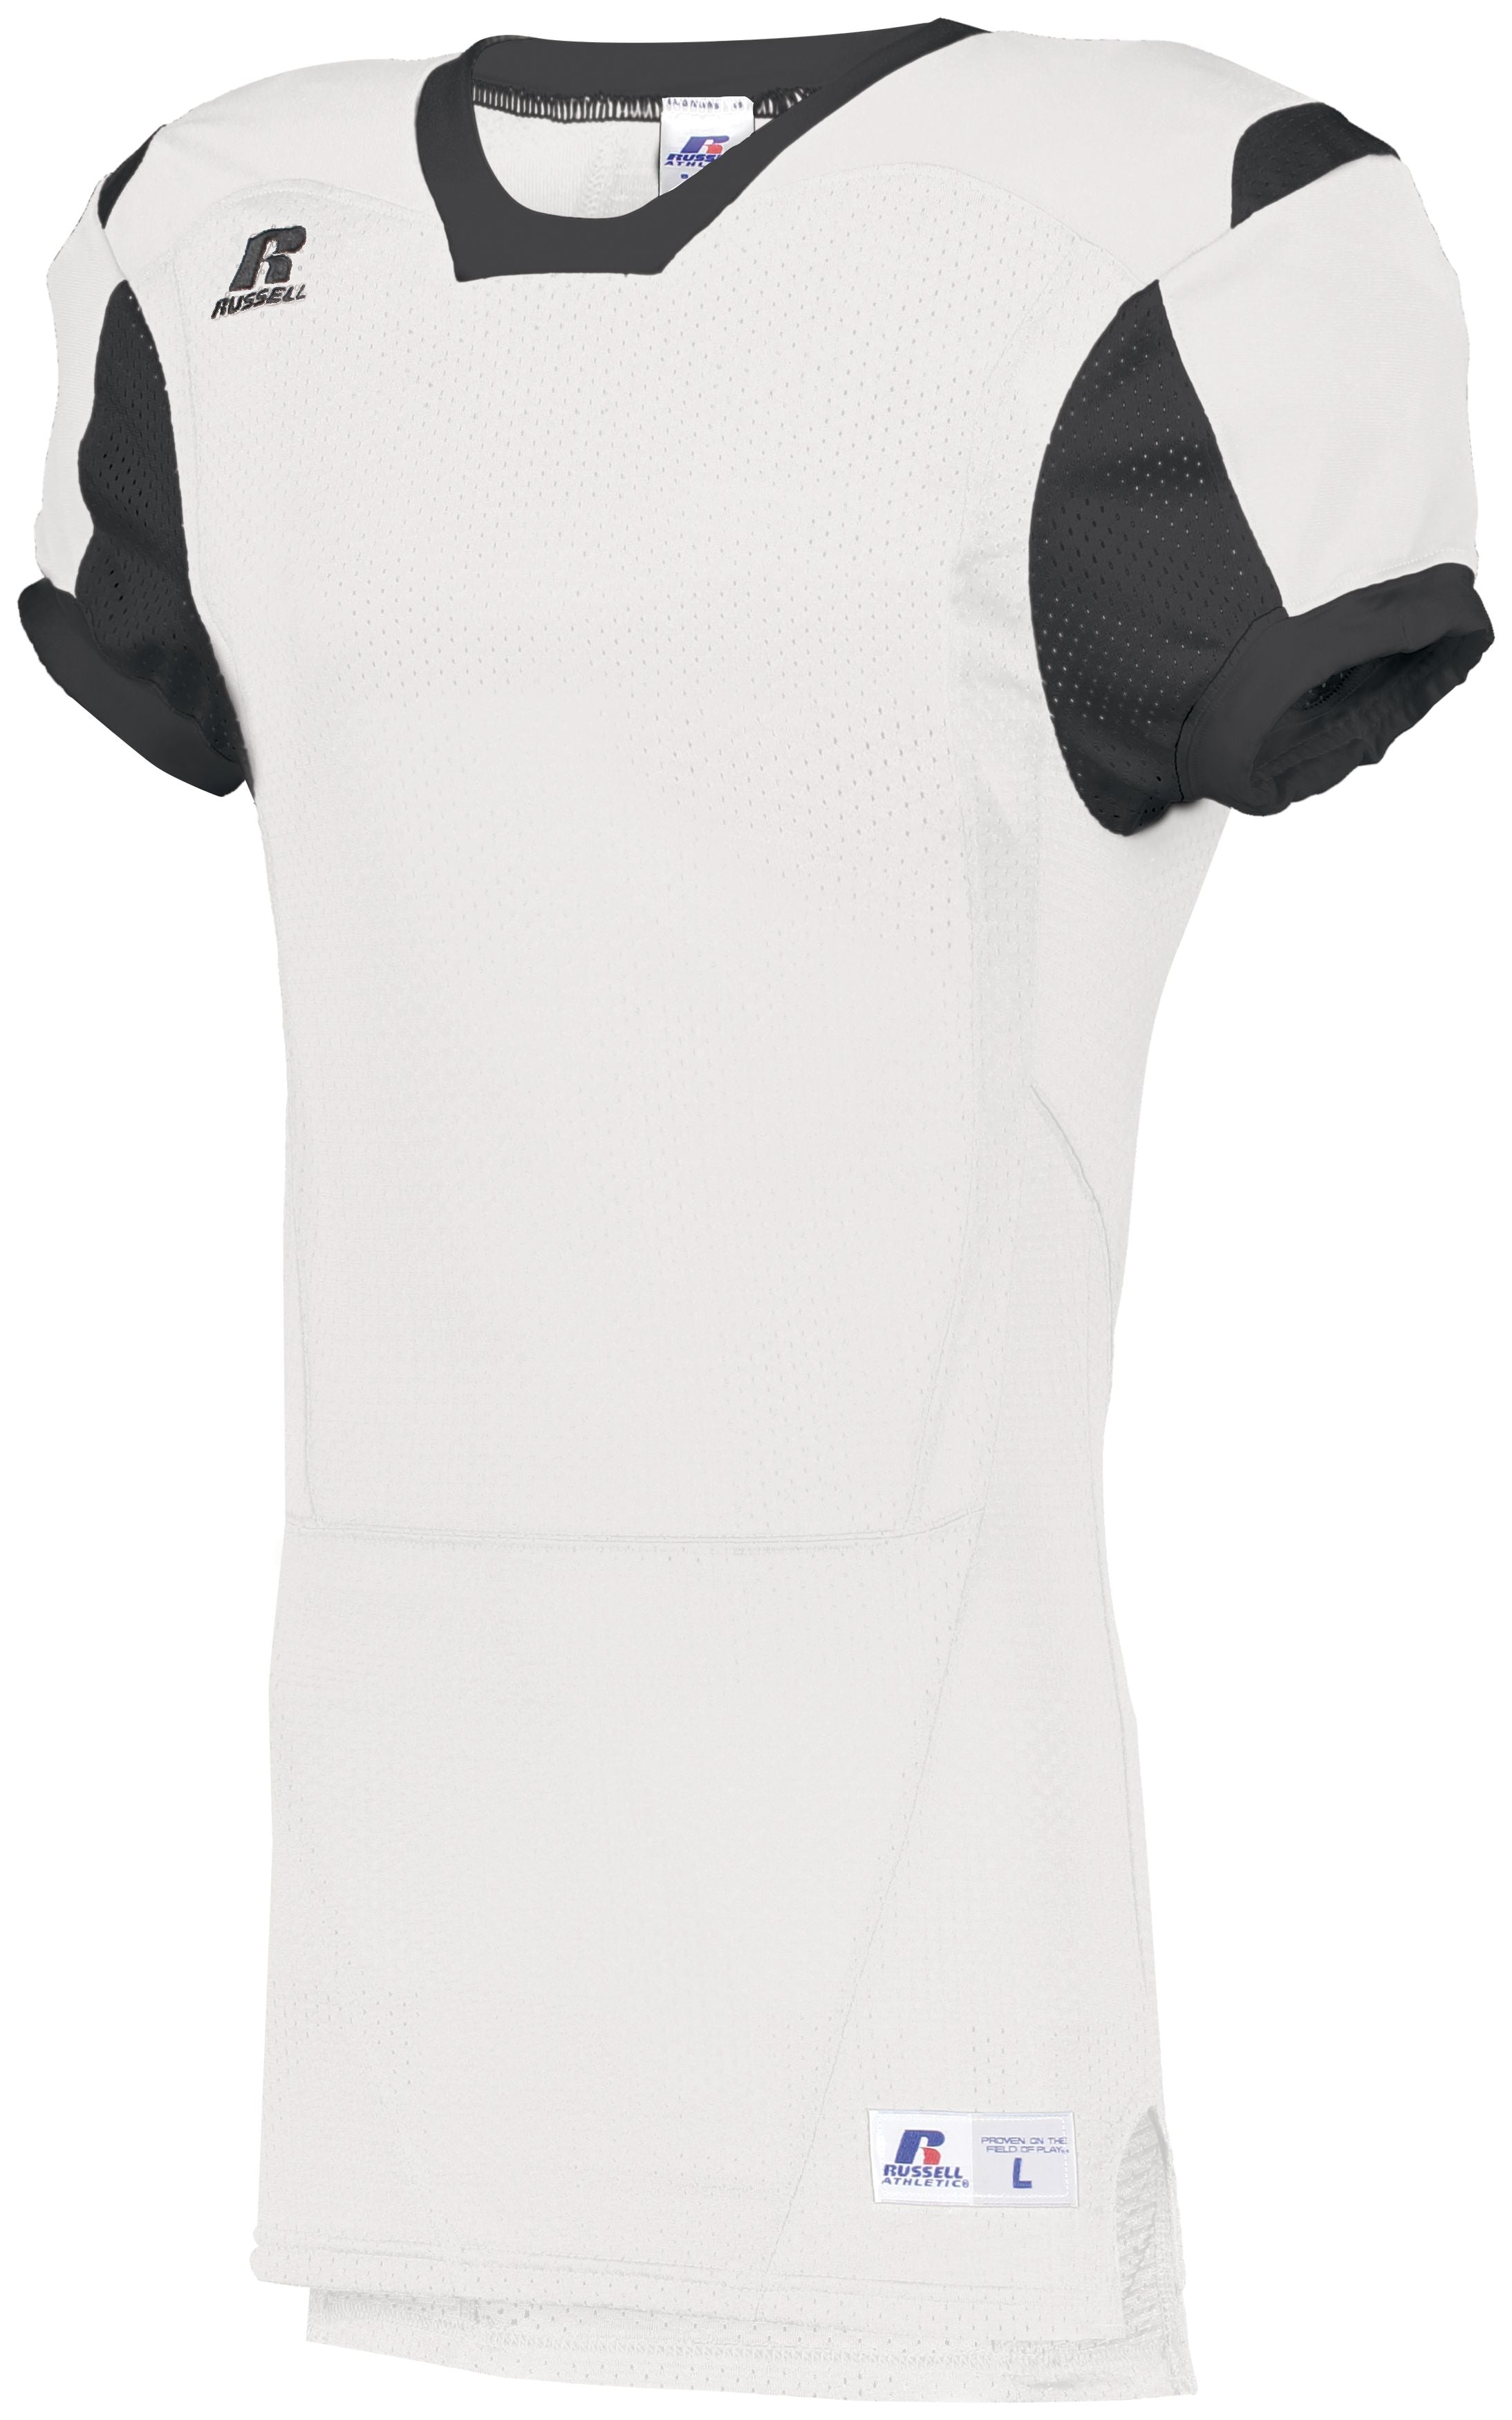 Russell Athletic Youth Color Block Game Jersey in White/Black  -Part of the Youth, Youth-Jersey, Football, Russell-Athletic-Products, Shirts, All-Sports, All-Sports-1 product lines at KanaleyCreations.com